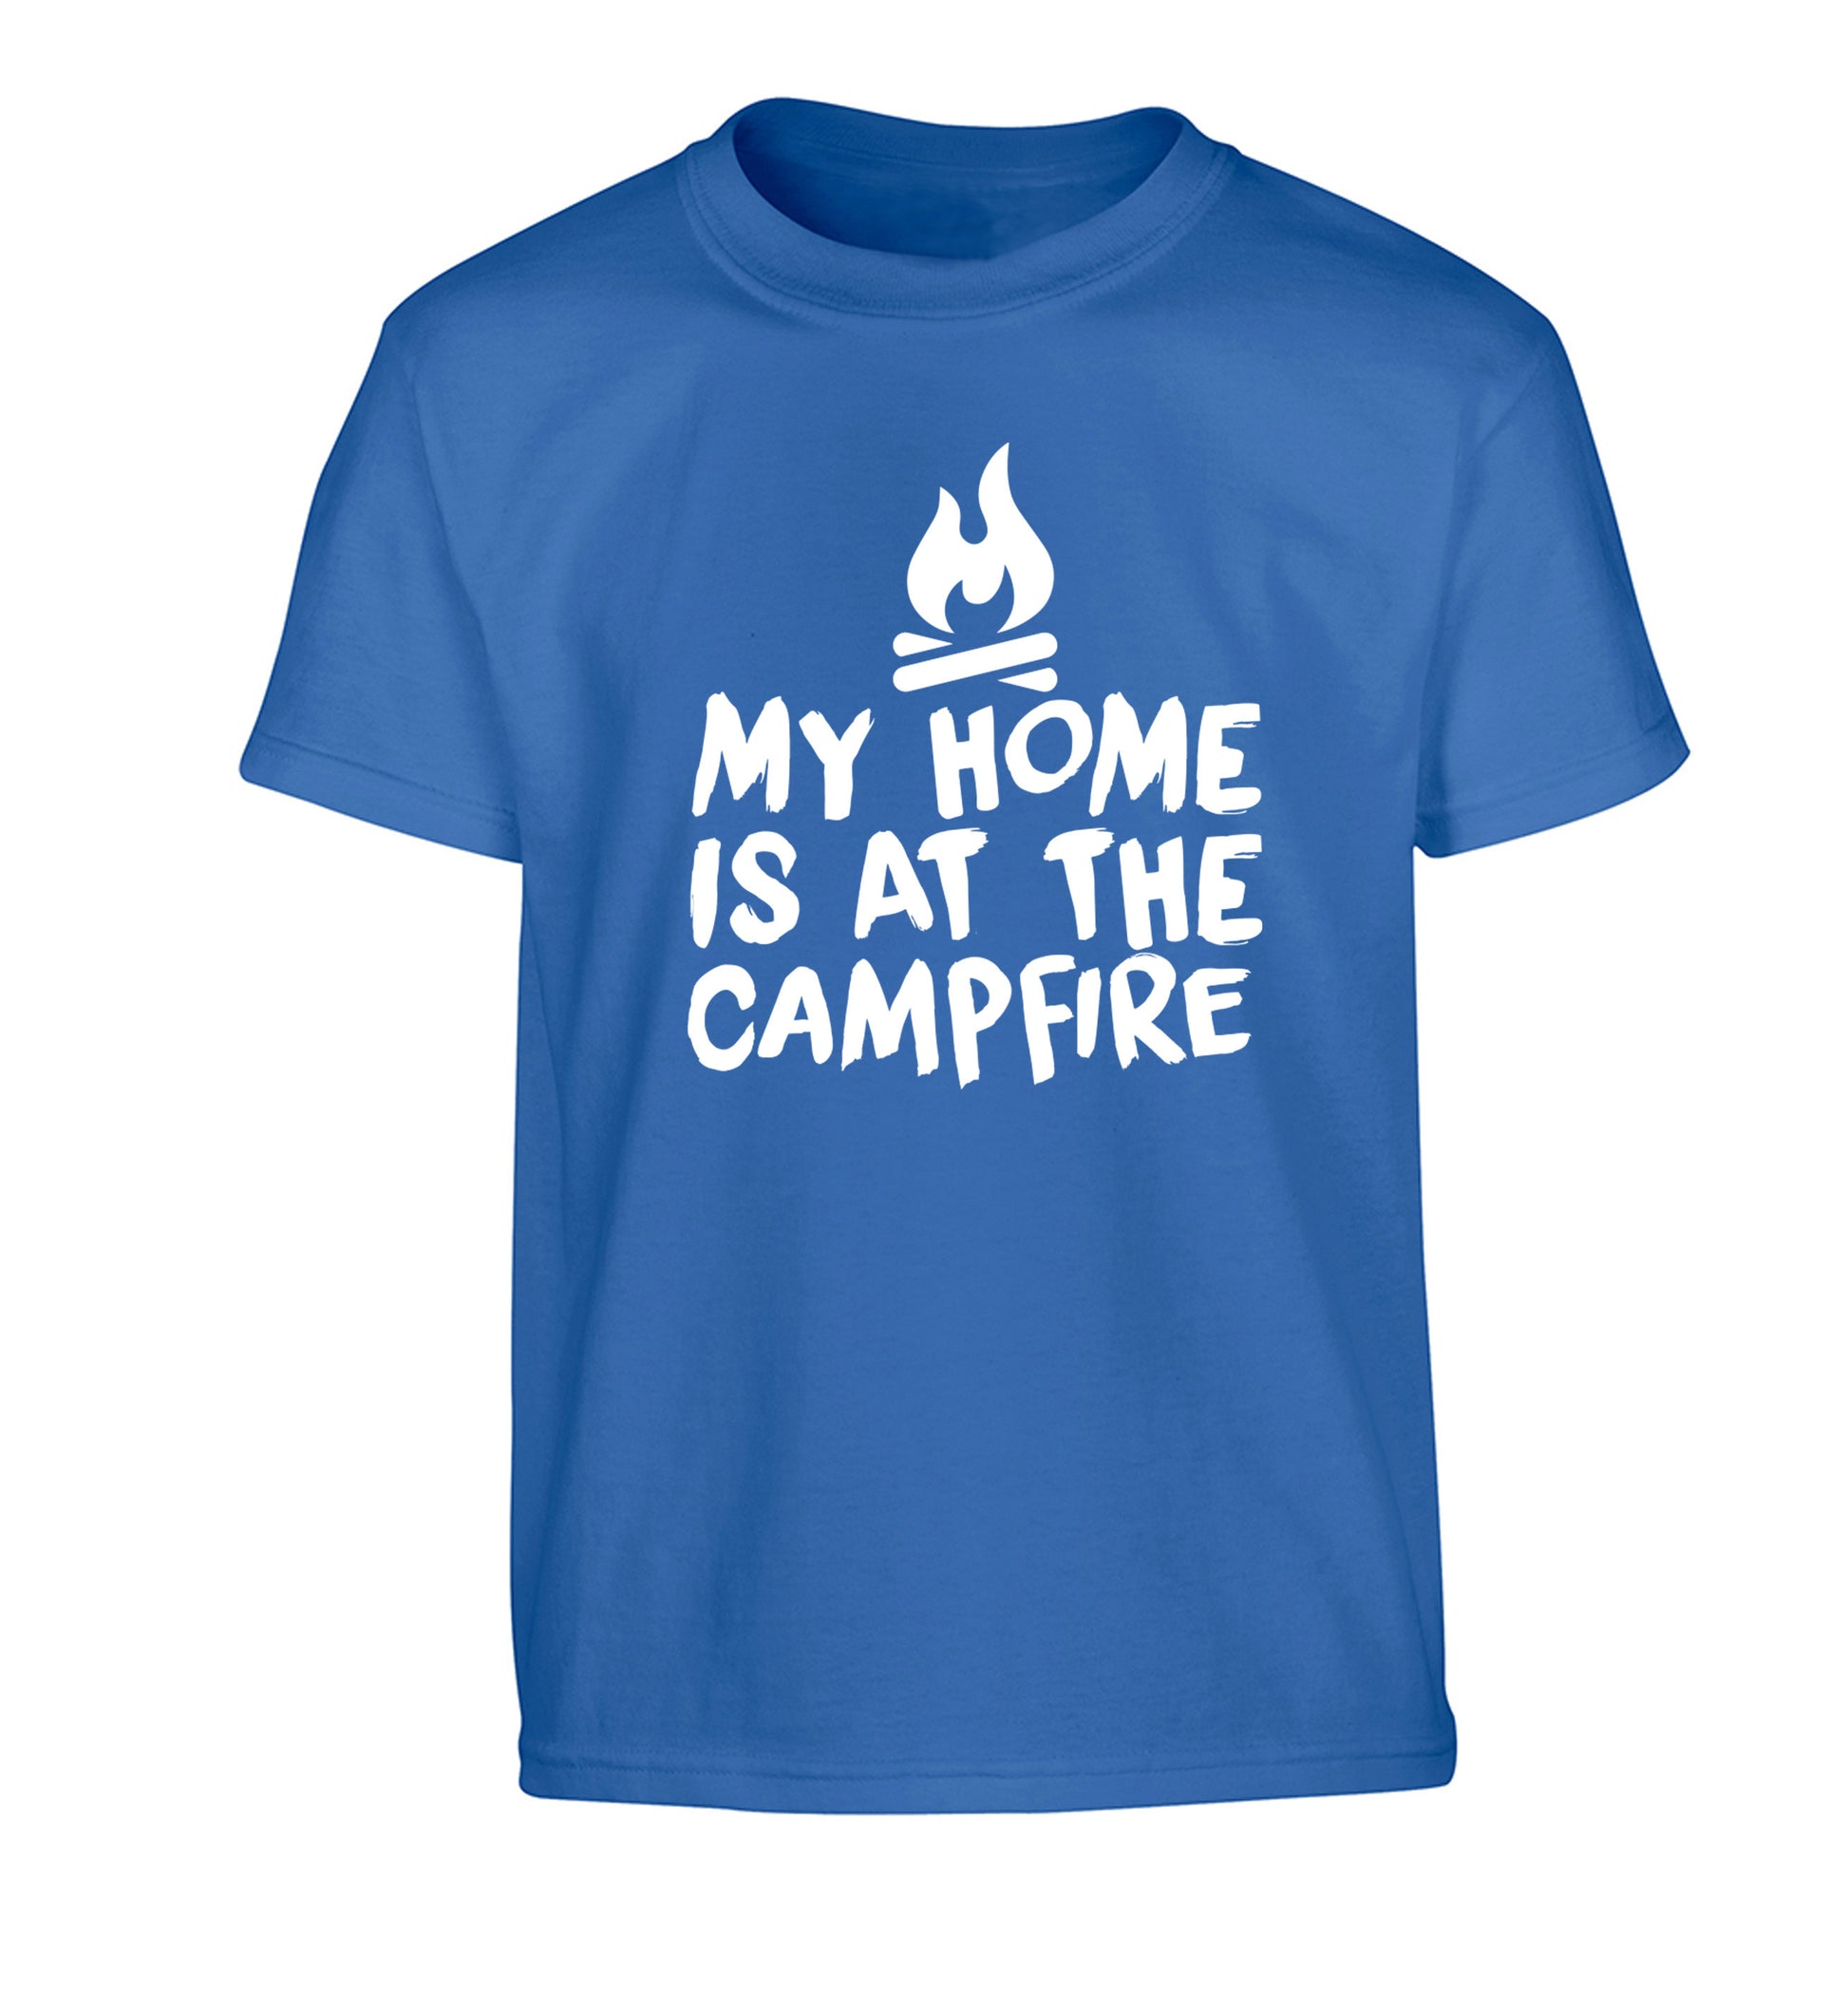 My home is at the campfire Children's blue Tshirt 12-14 Years